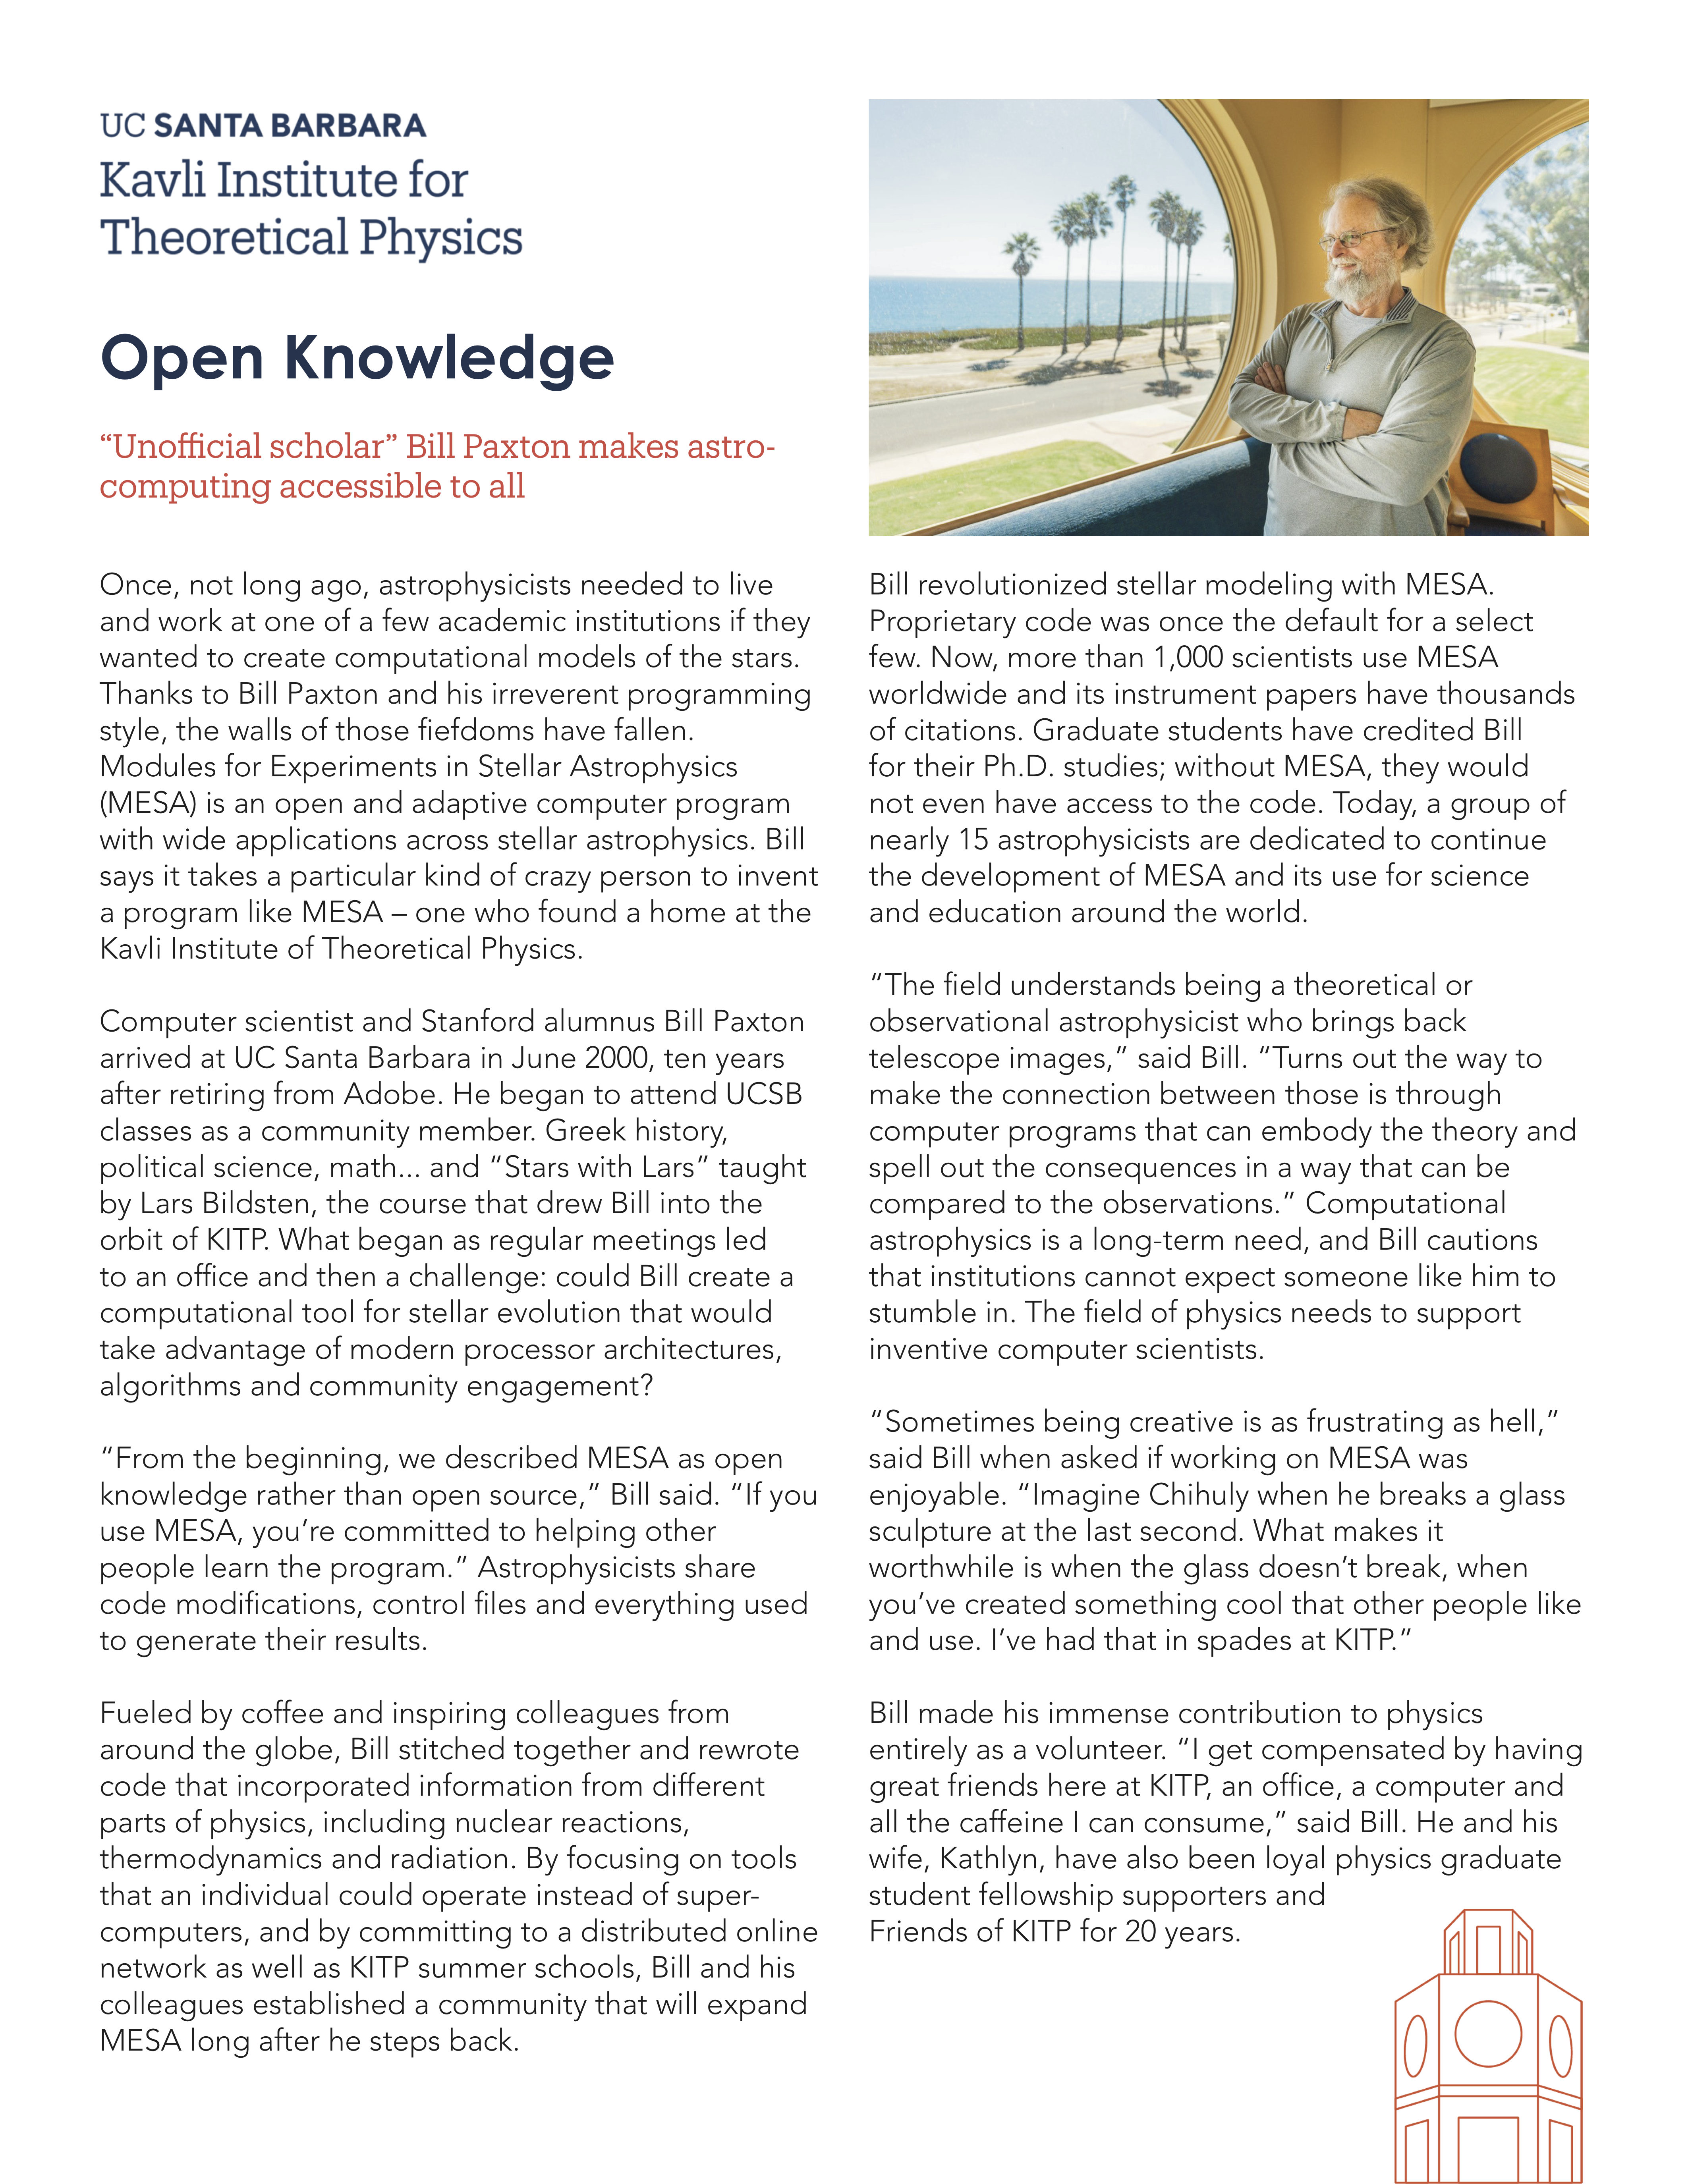 Page of article on Open Knowledge from 2020 KITP Impact Report